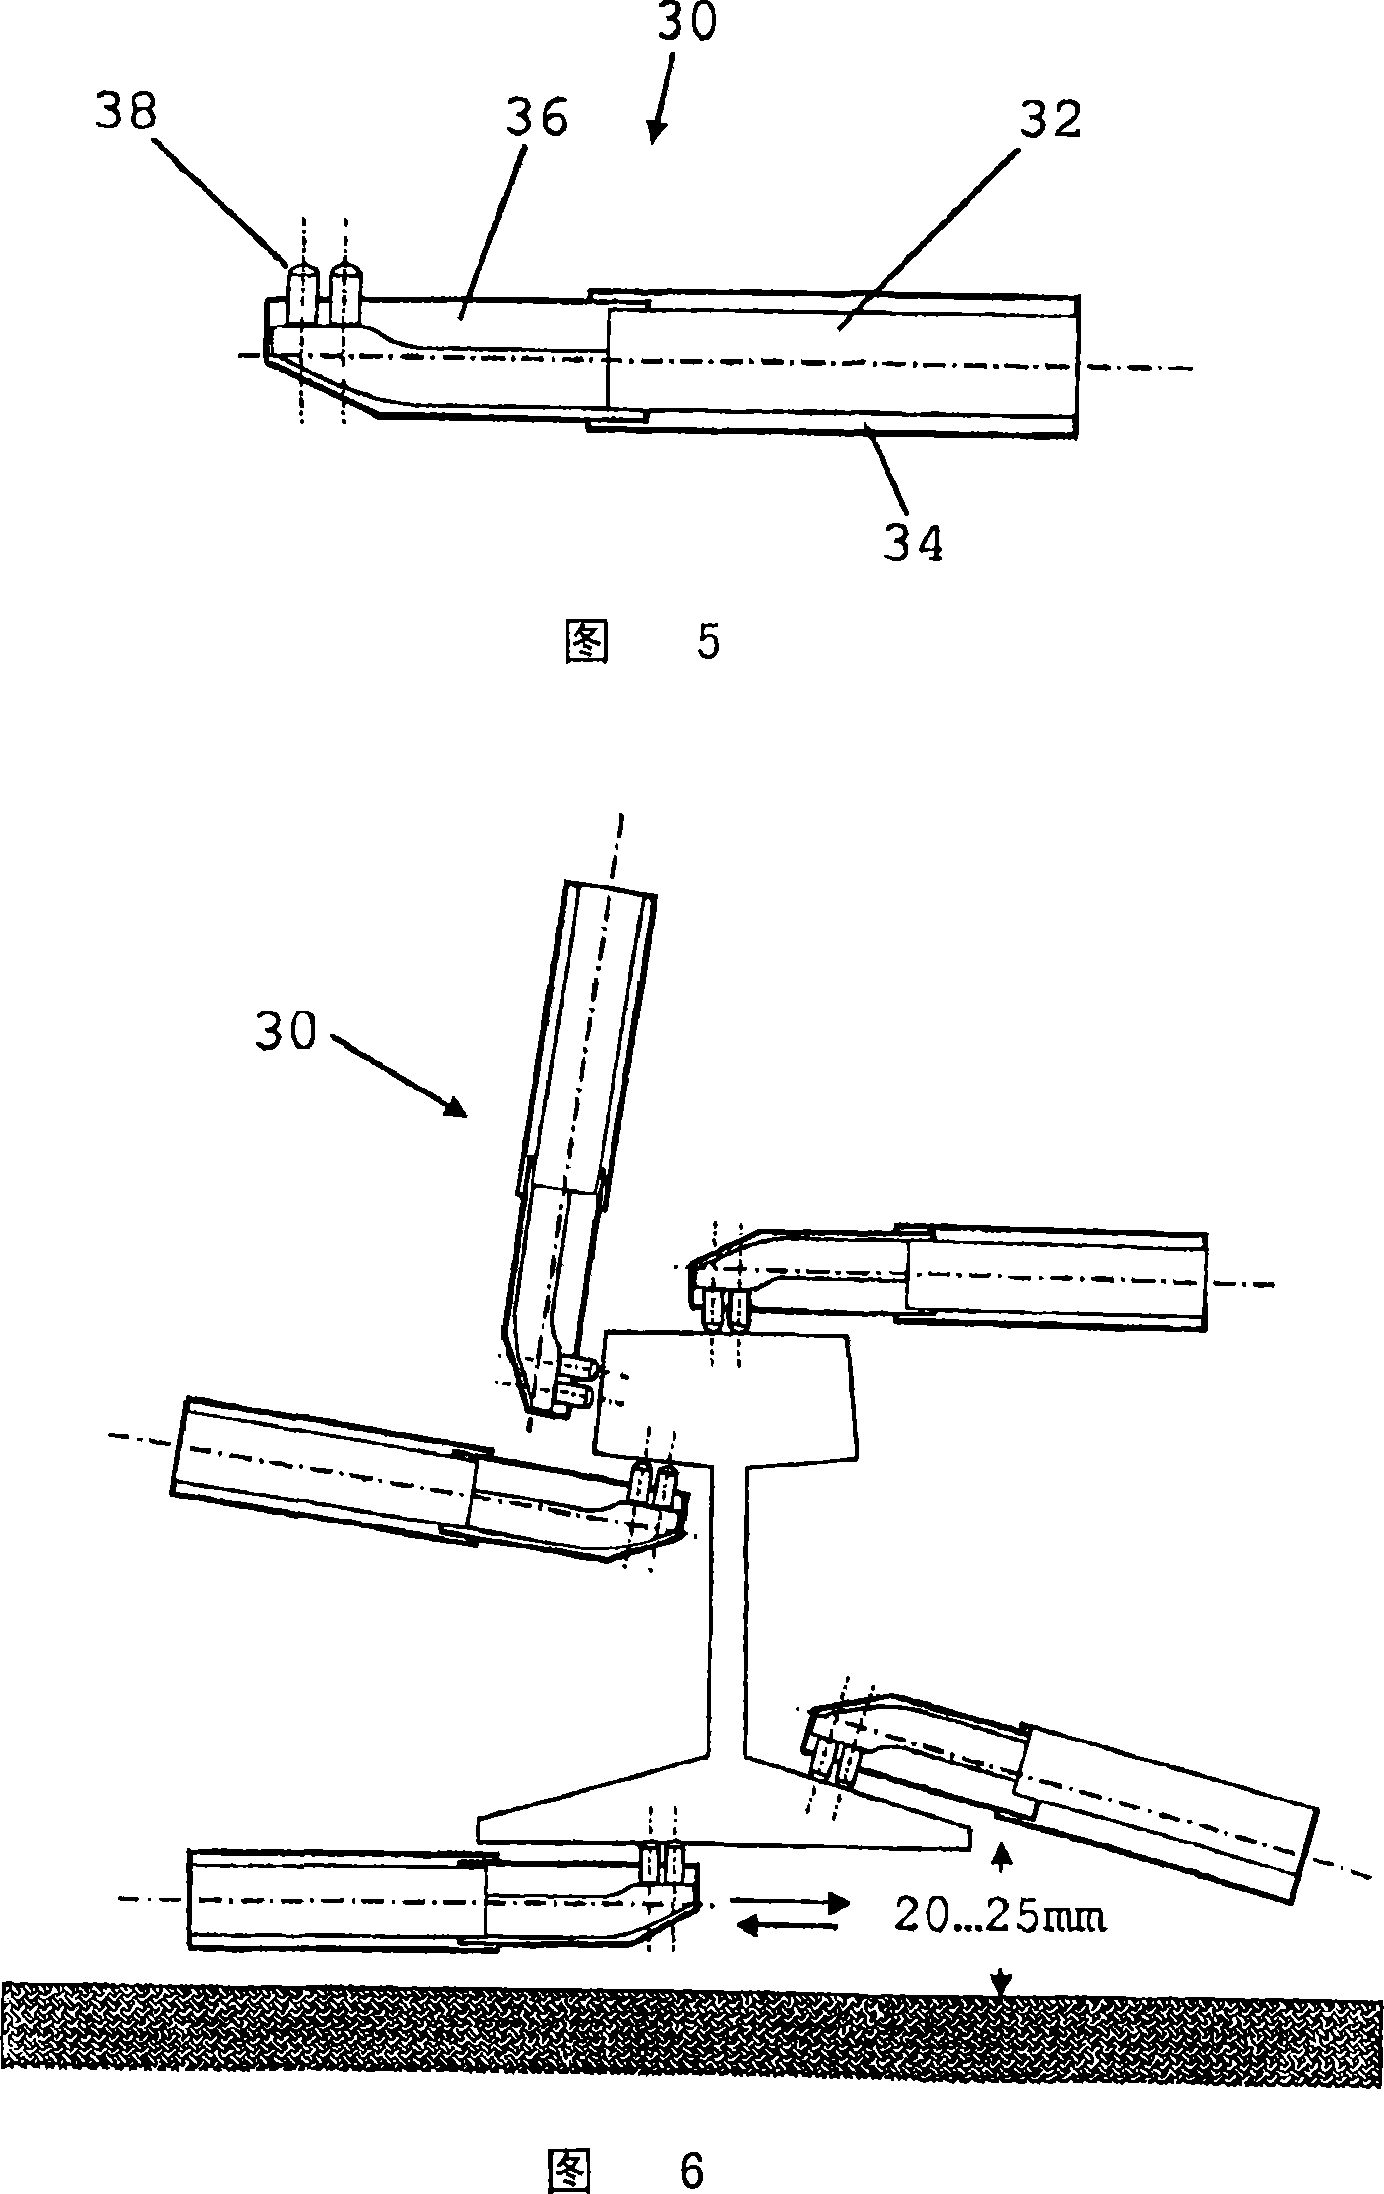 Method of improving quality and reliability of welded rail joint properties by ultrasonic impact treatment